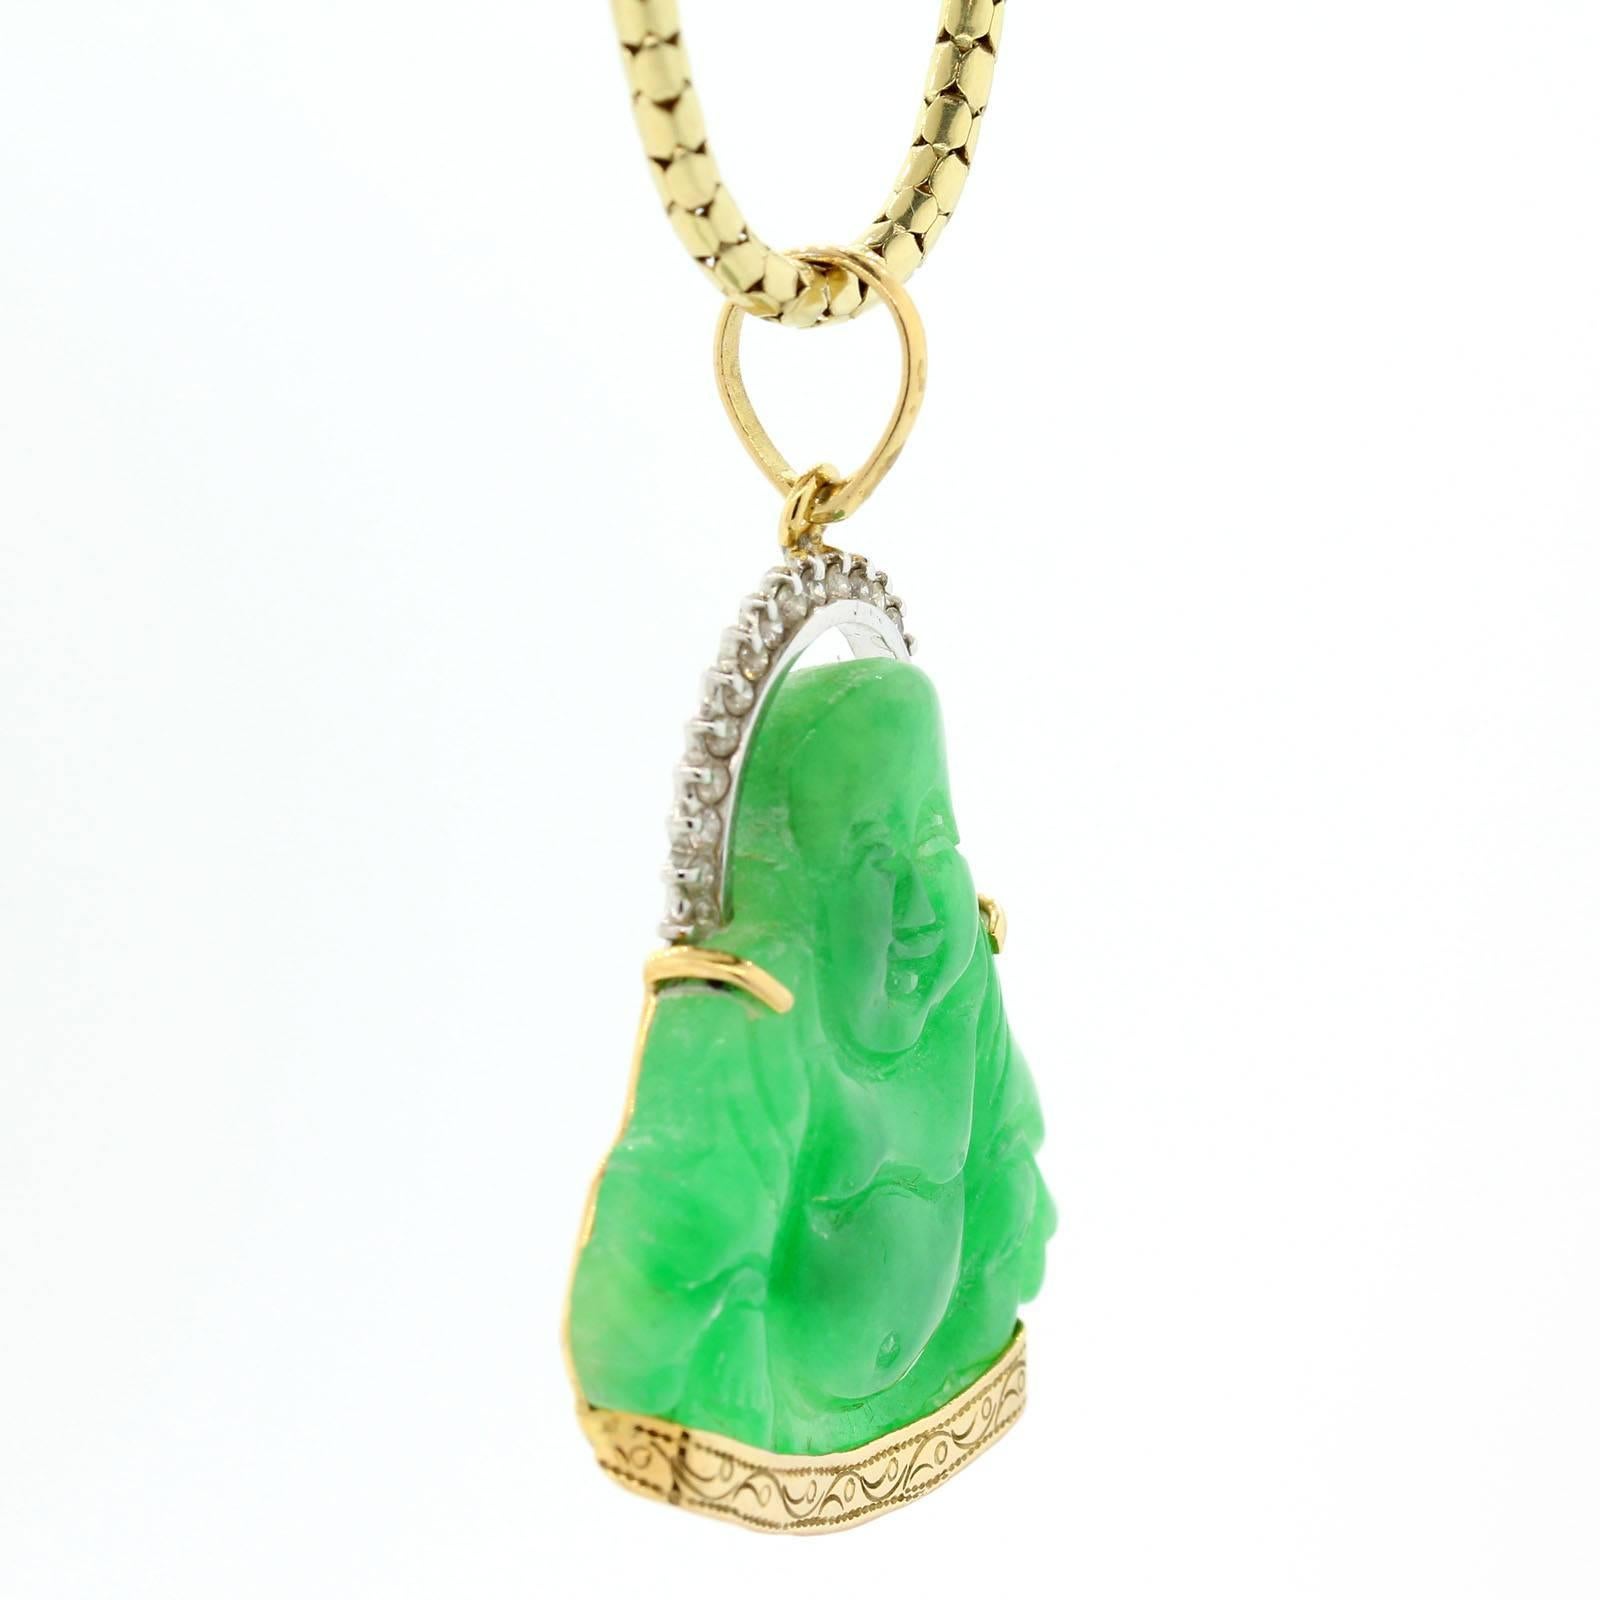  An uplifting, feel good 18K carved Jadeite Buddha figure resting on an engraved gold frame.  The Buddah is accented with a  sparkly halo of 0.40 carat of Round Brilliant Cut Diamonds.   The pendant is suspended from an 18" long 14KT yellow